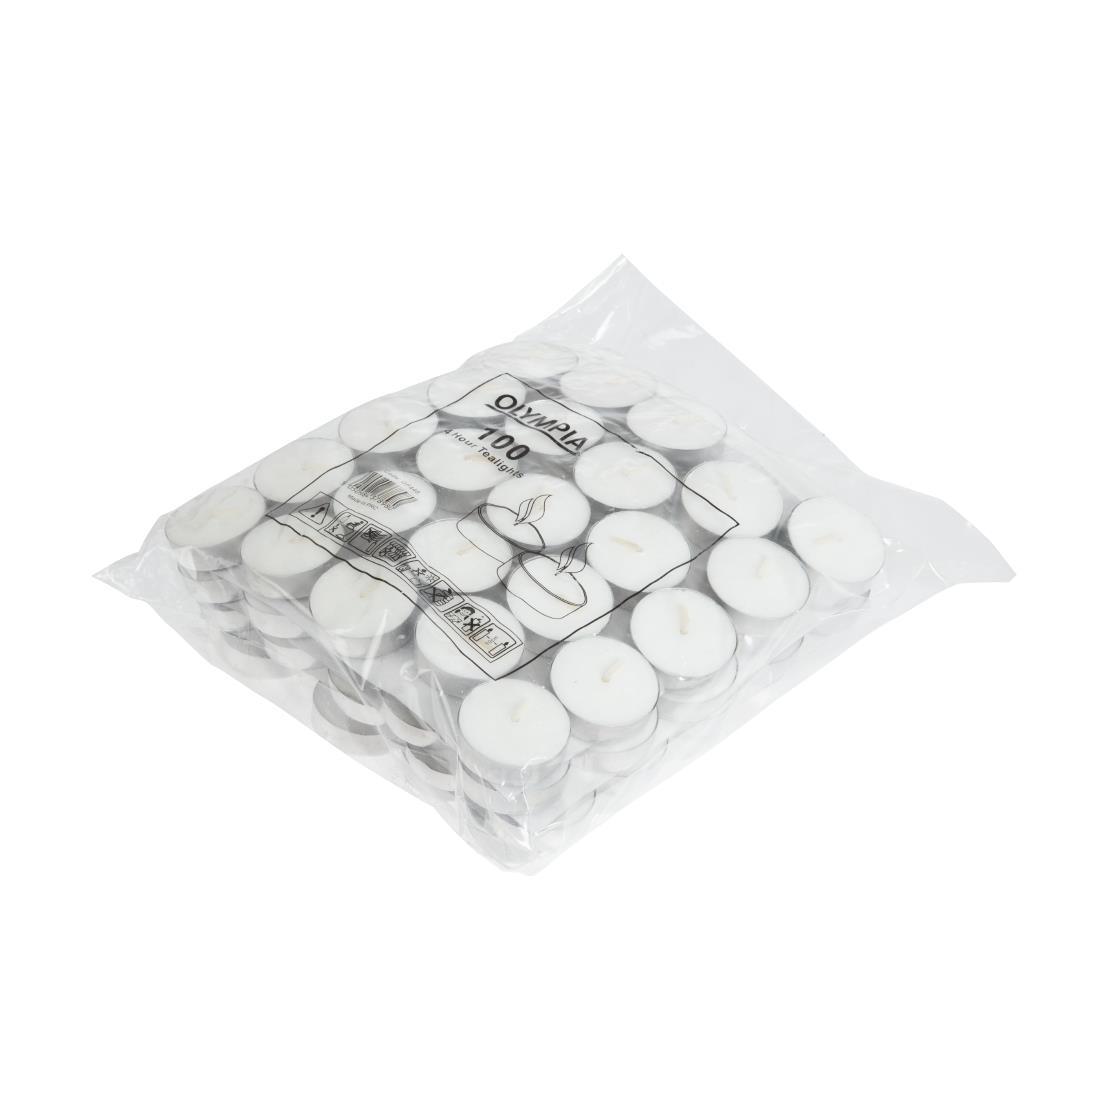 Olympia 4 Hour Tealights (Pack of 100) - GF448  - 5